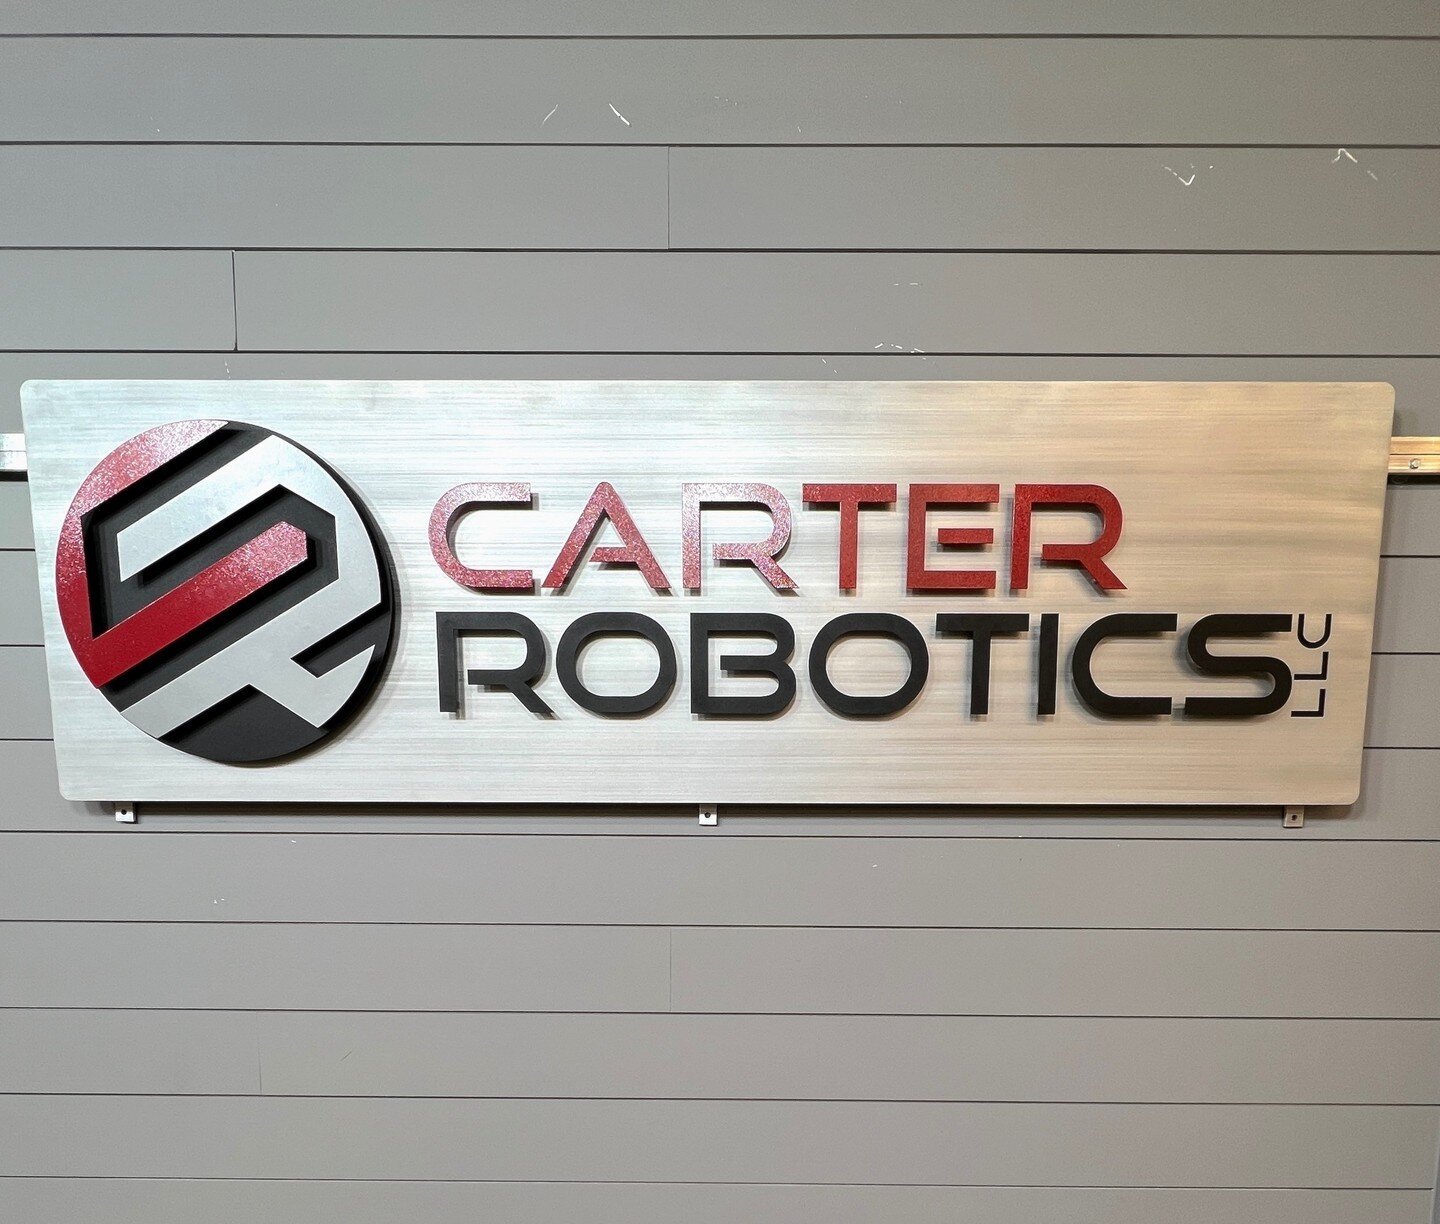 🛠️ Introducing Carter Robotics LLC!

Carter Robotics LLC is your go-to Systems Integrator, dedicated to meeting your needs. Specializing in advanced robotic automation cells, Carter Robotics excels in new designs/installations, system integrations, 